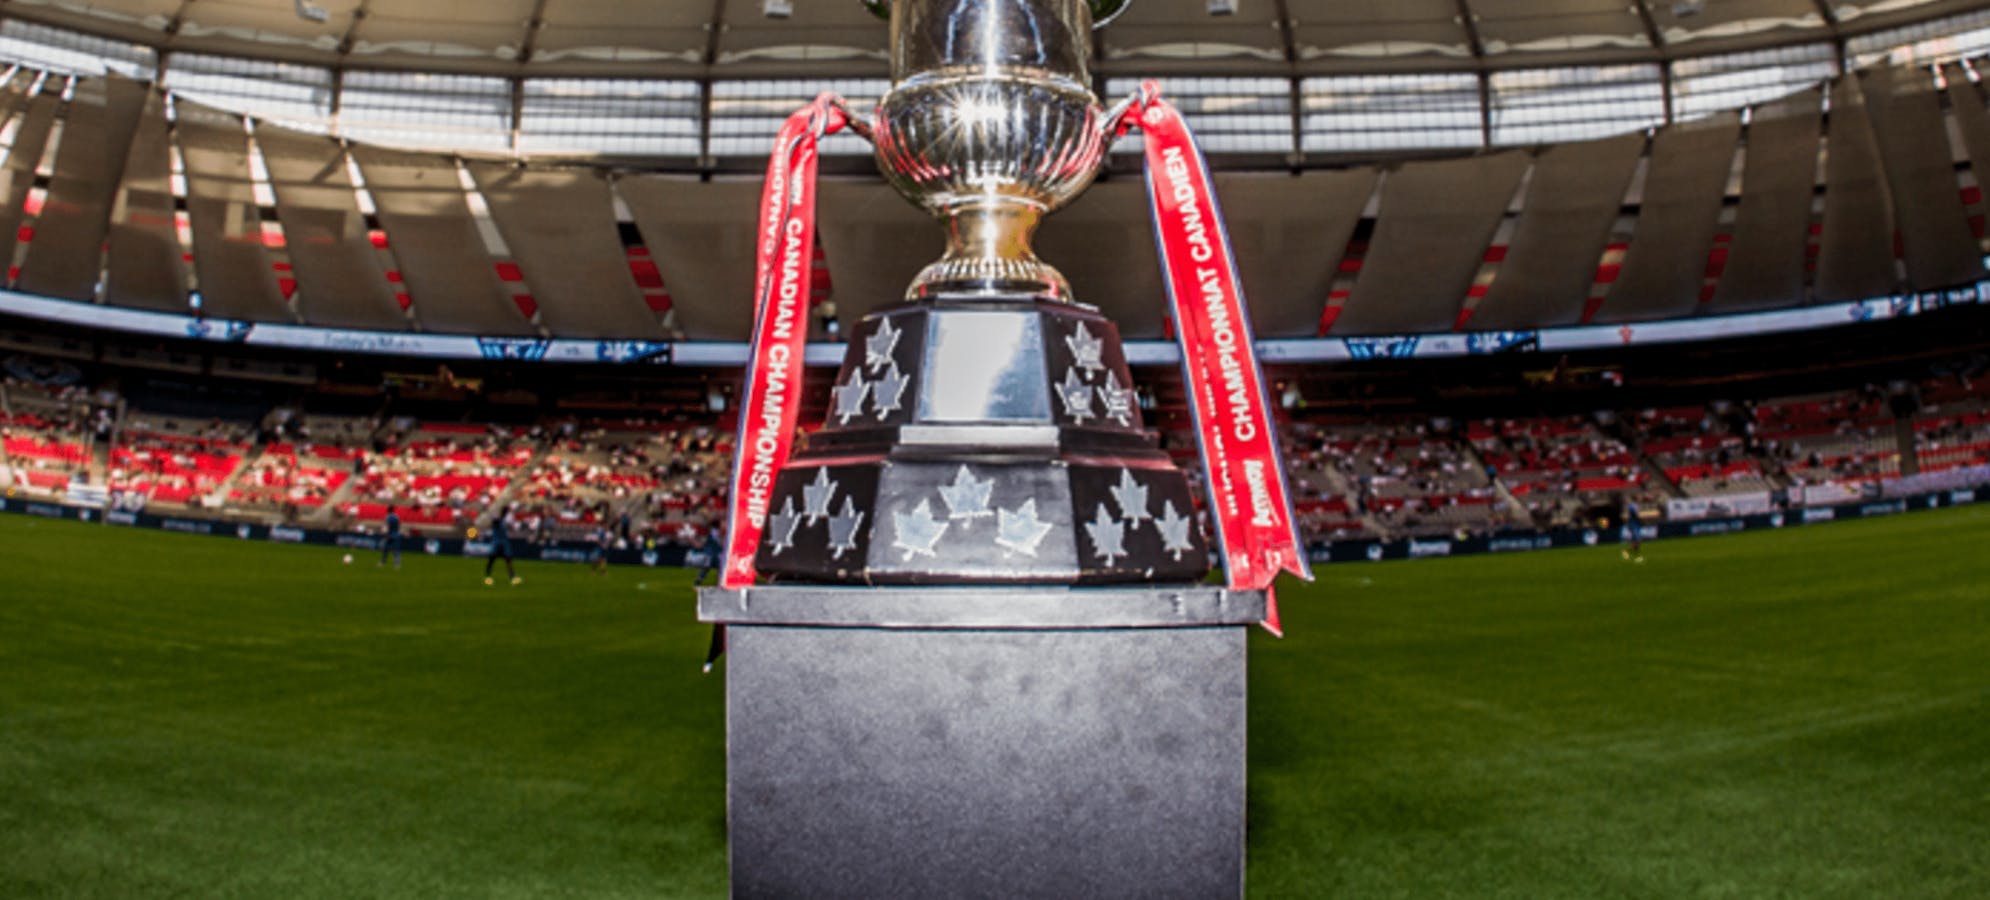 Whitecaps FC to host Club León in 2023 Leagues Cup on Friday, July 21 at BC  Place